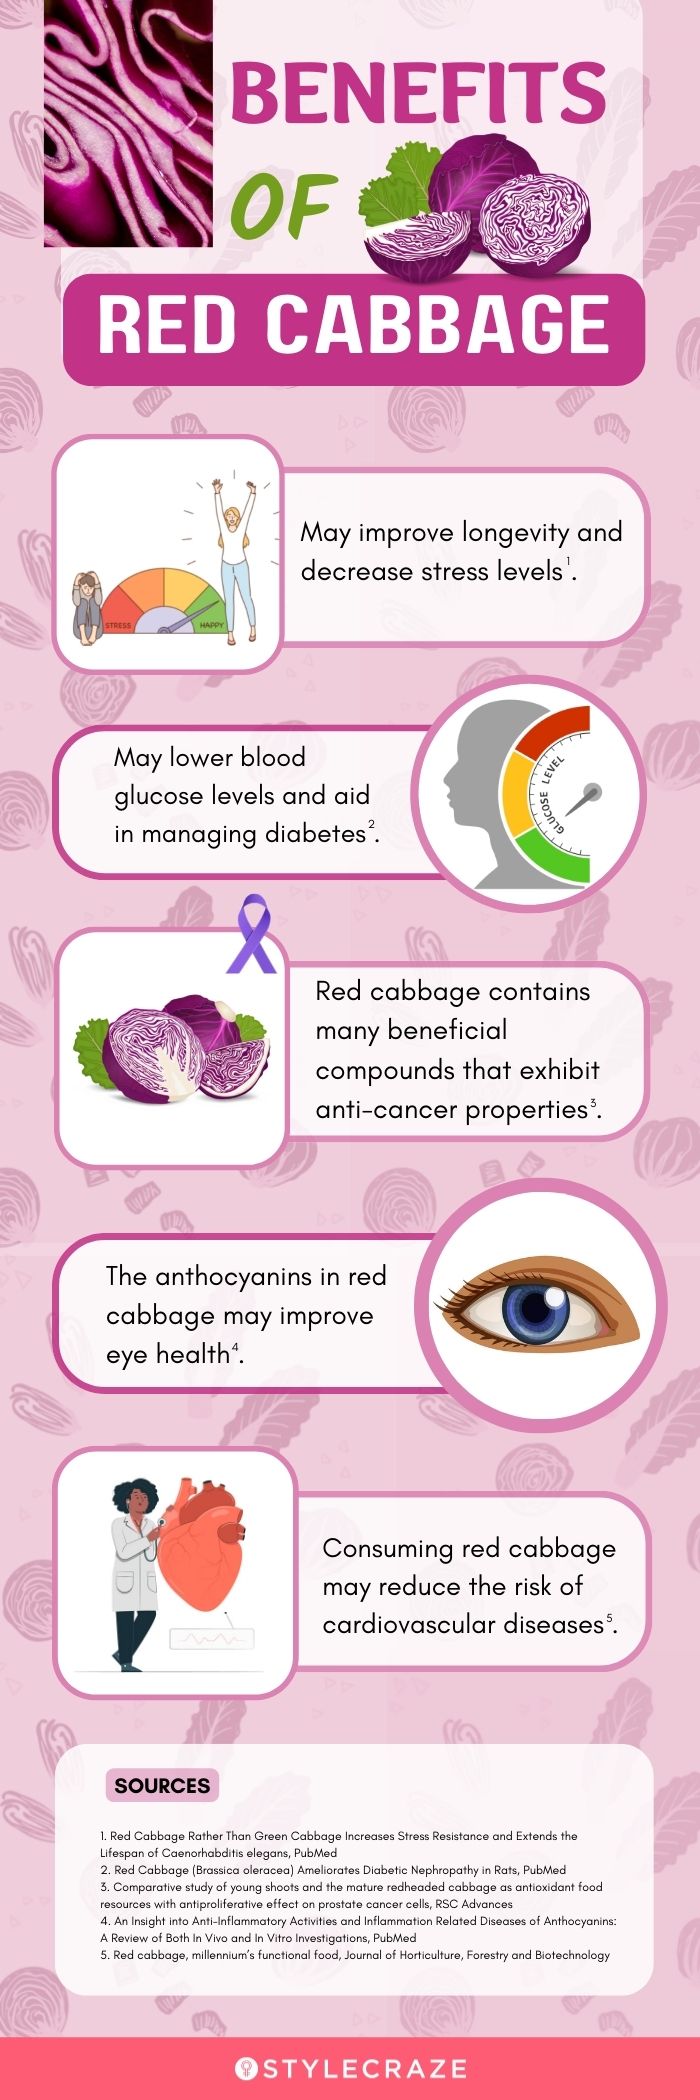 benefits of red cabbage [infographic]